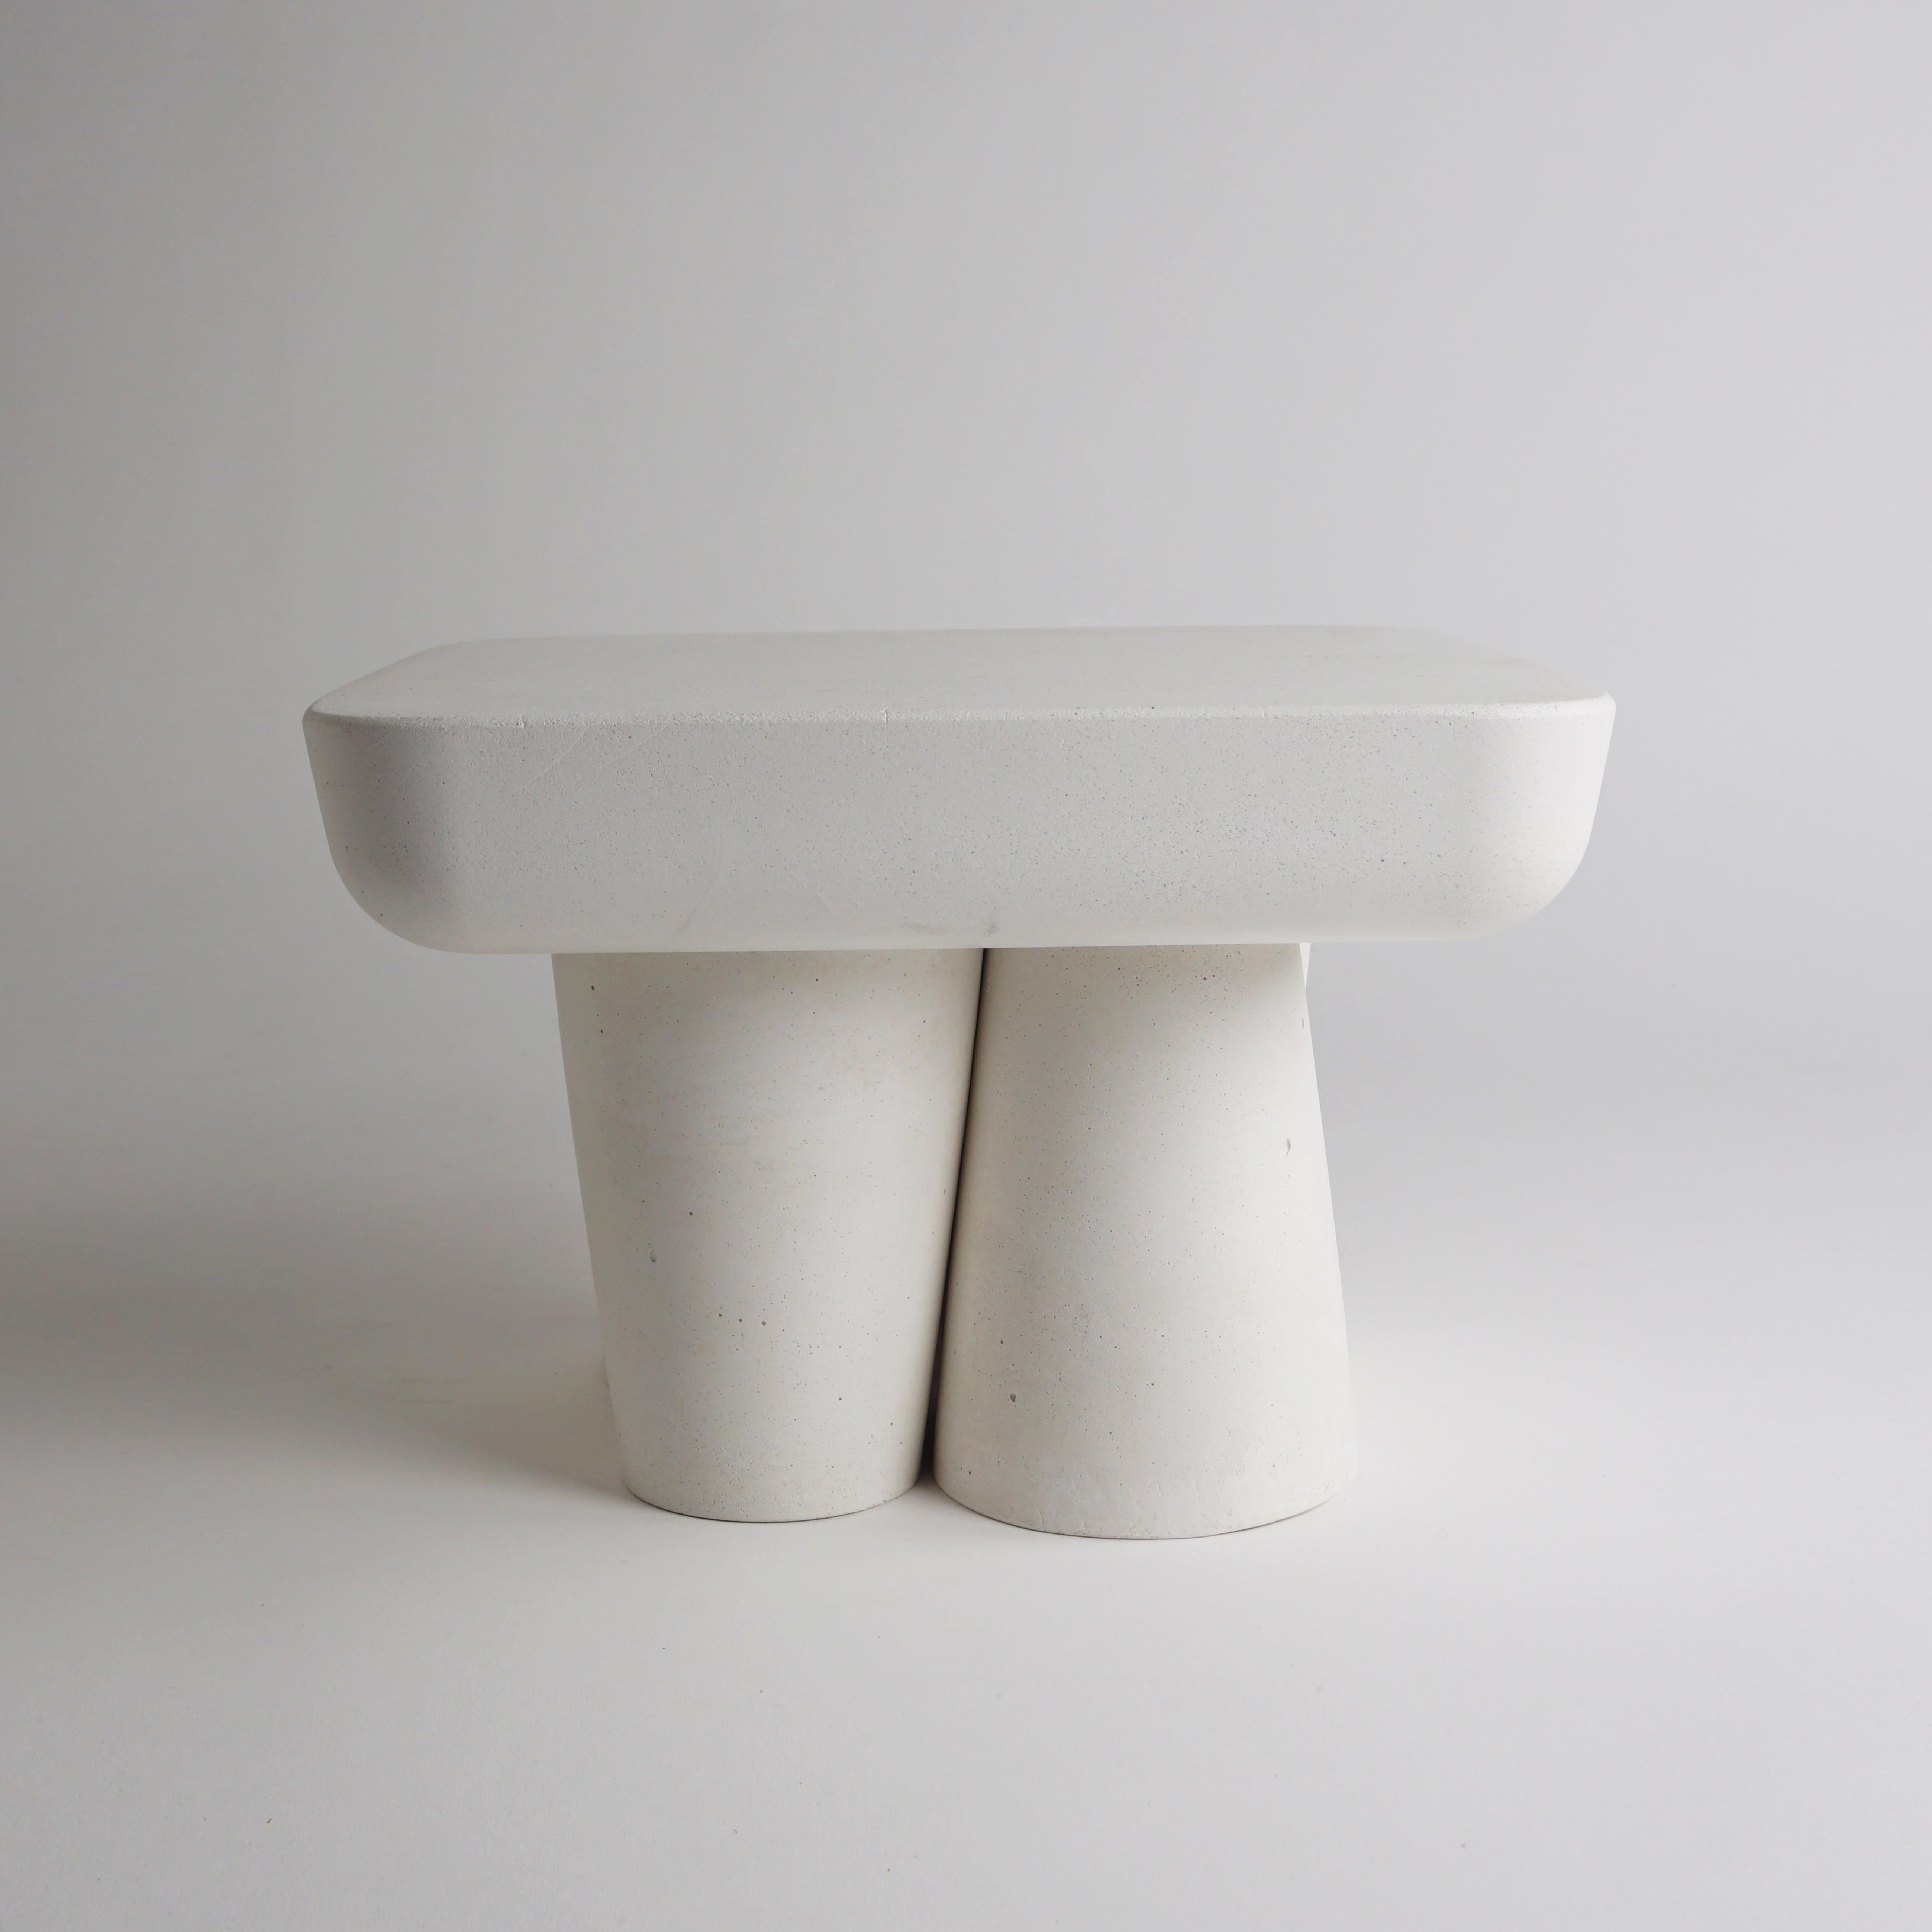 European 21st century contemporary modern sculptural marble, stone, concrete centerpiece stand 'Homme' in white by ALENTES.

Homme
Sculptural Display Stand
The simple yet different facades of this stand bring a sophisticated tone to any setting.